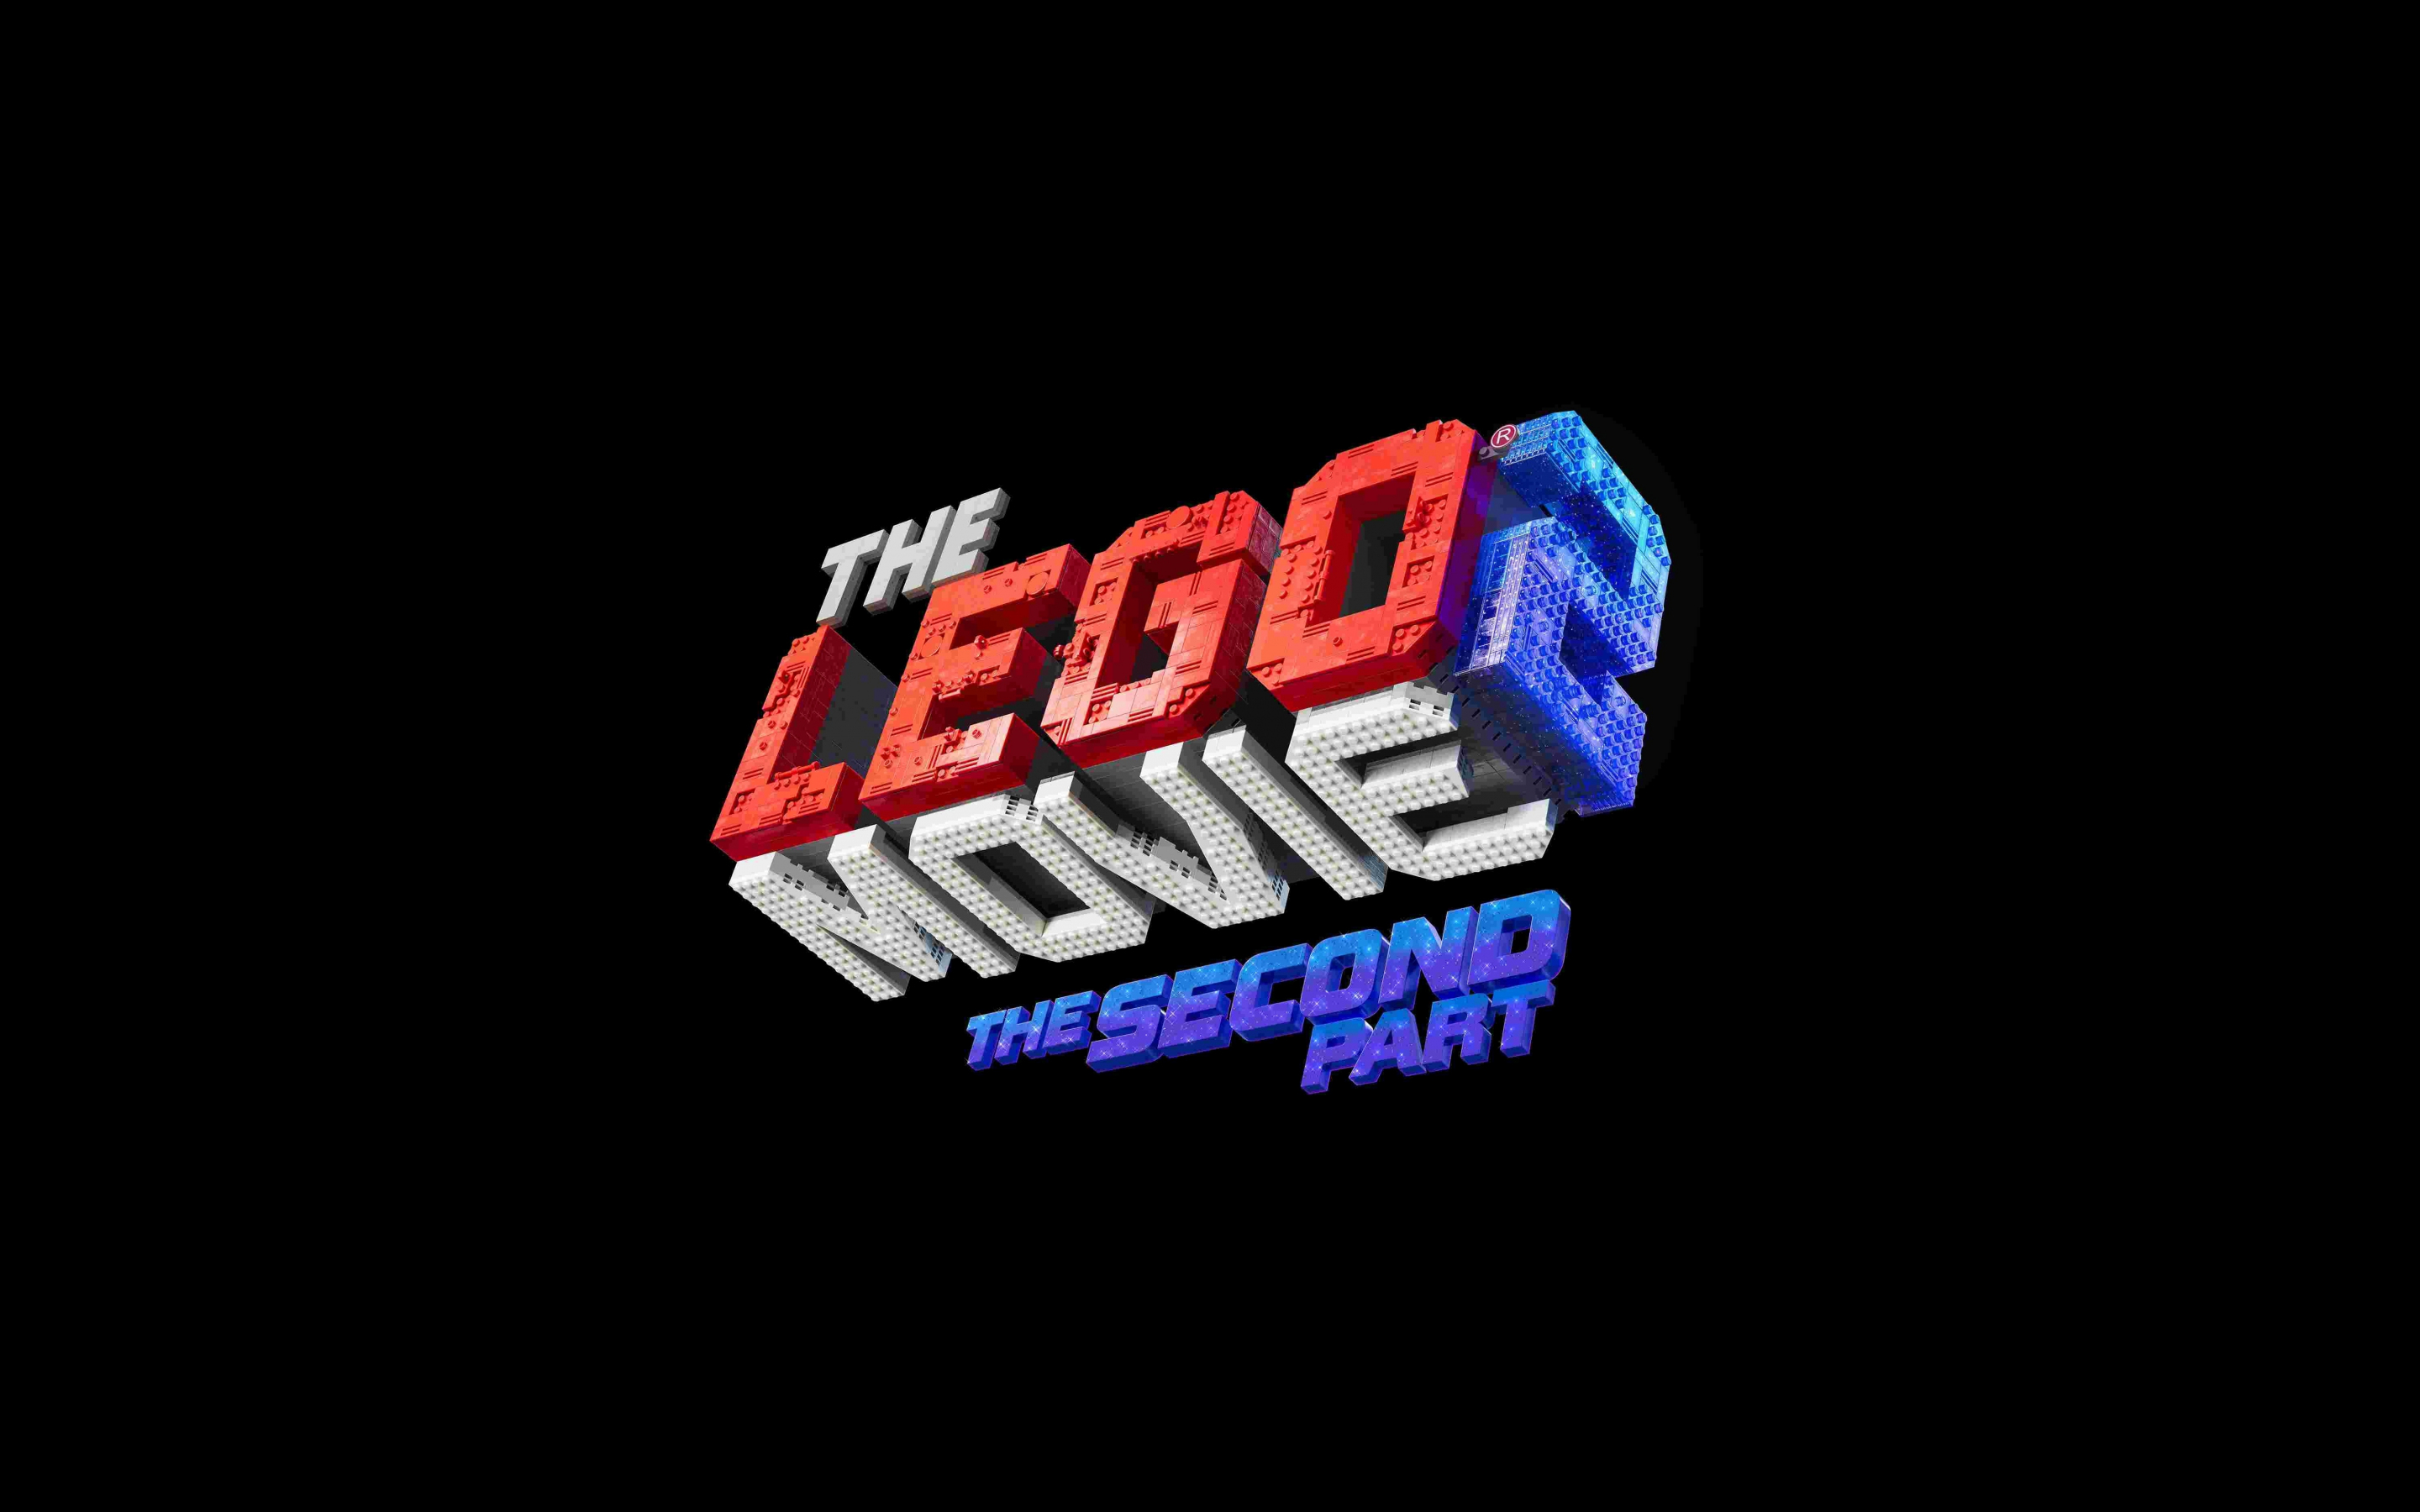 The Lego Movie 2: The Second Part, poster, 2019 movie, 2880x1800 wallpaper